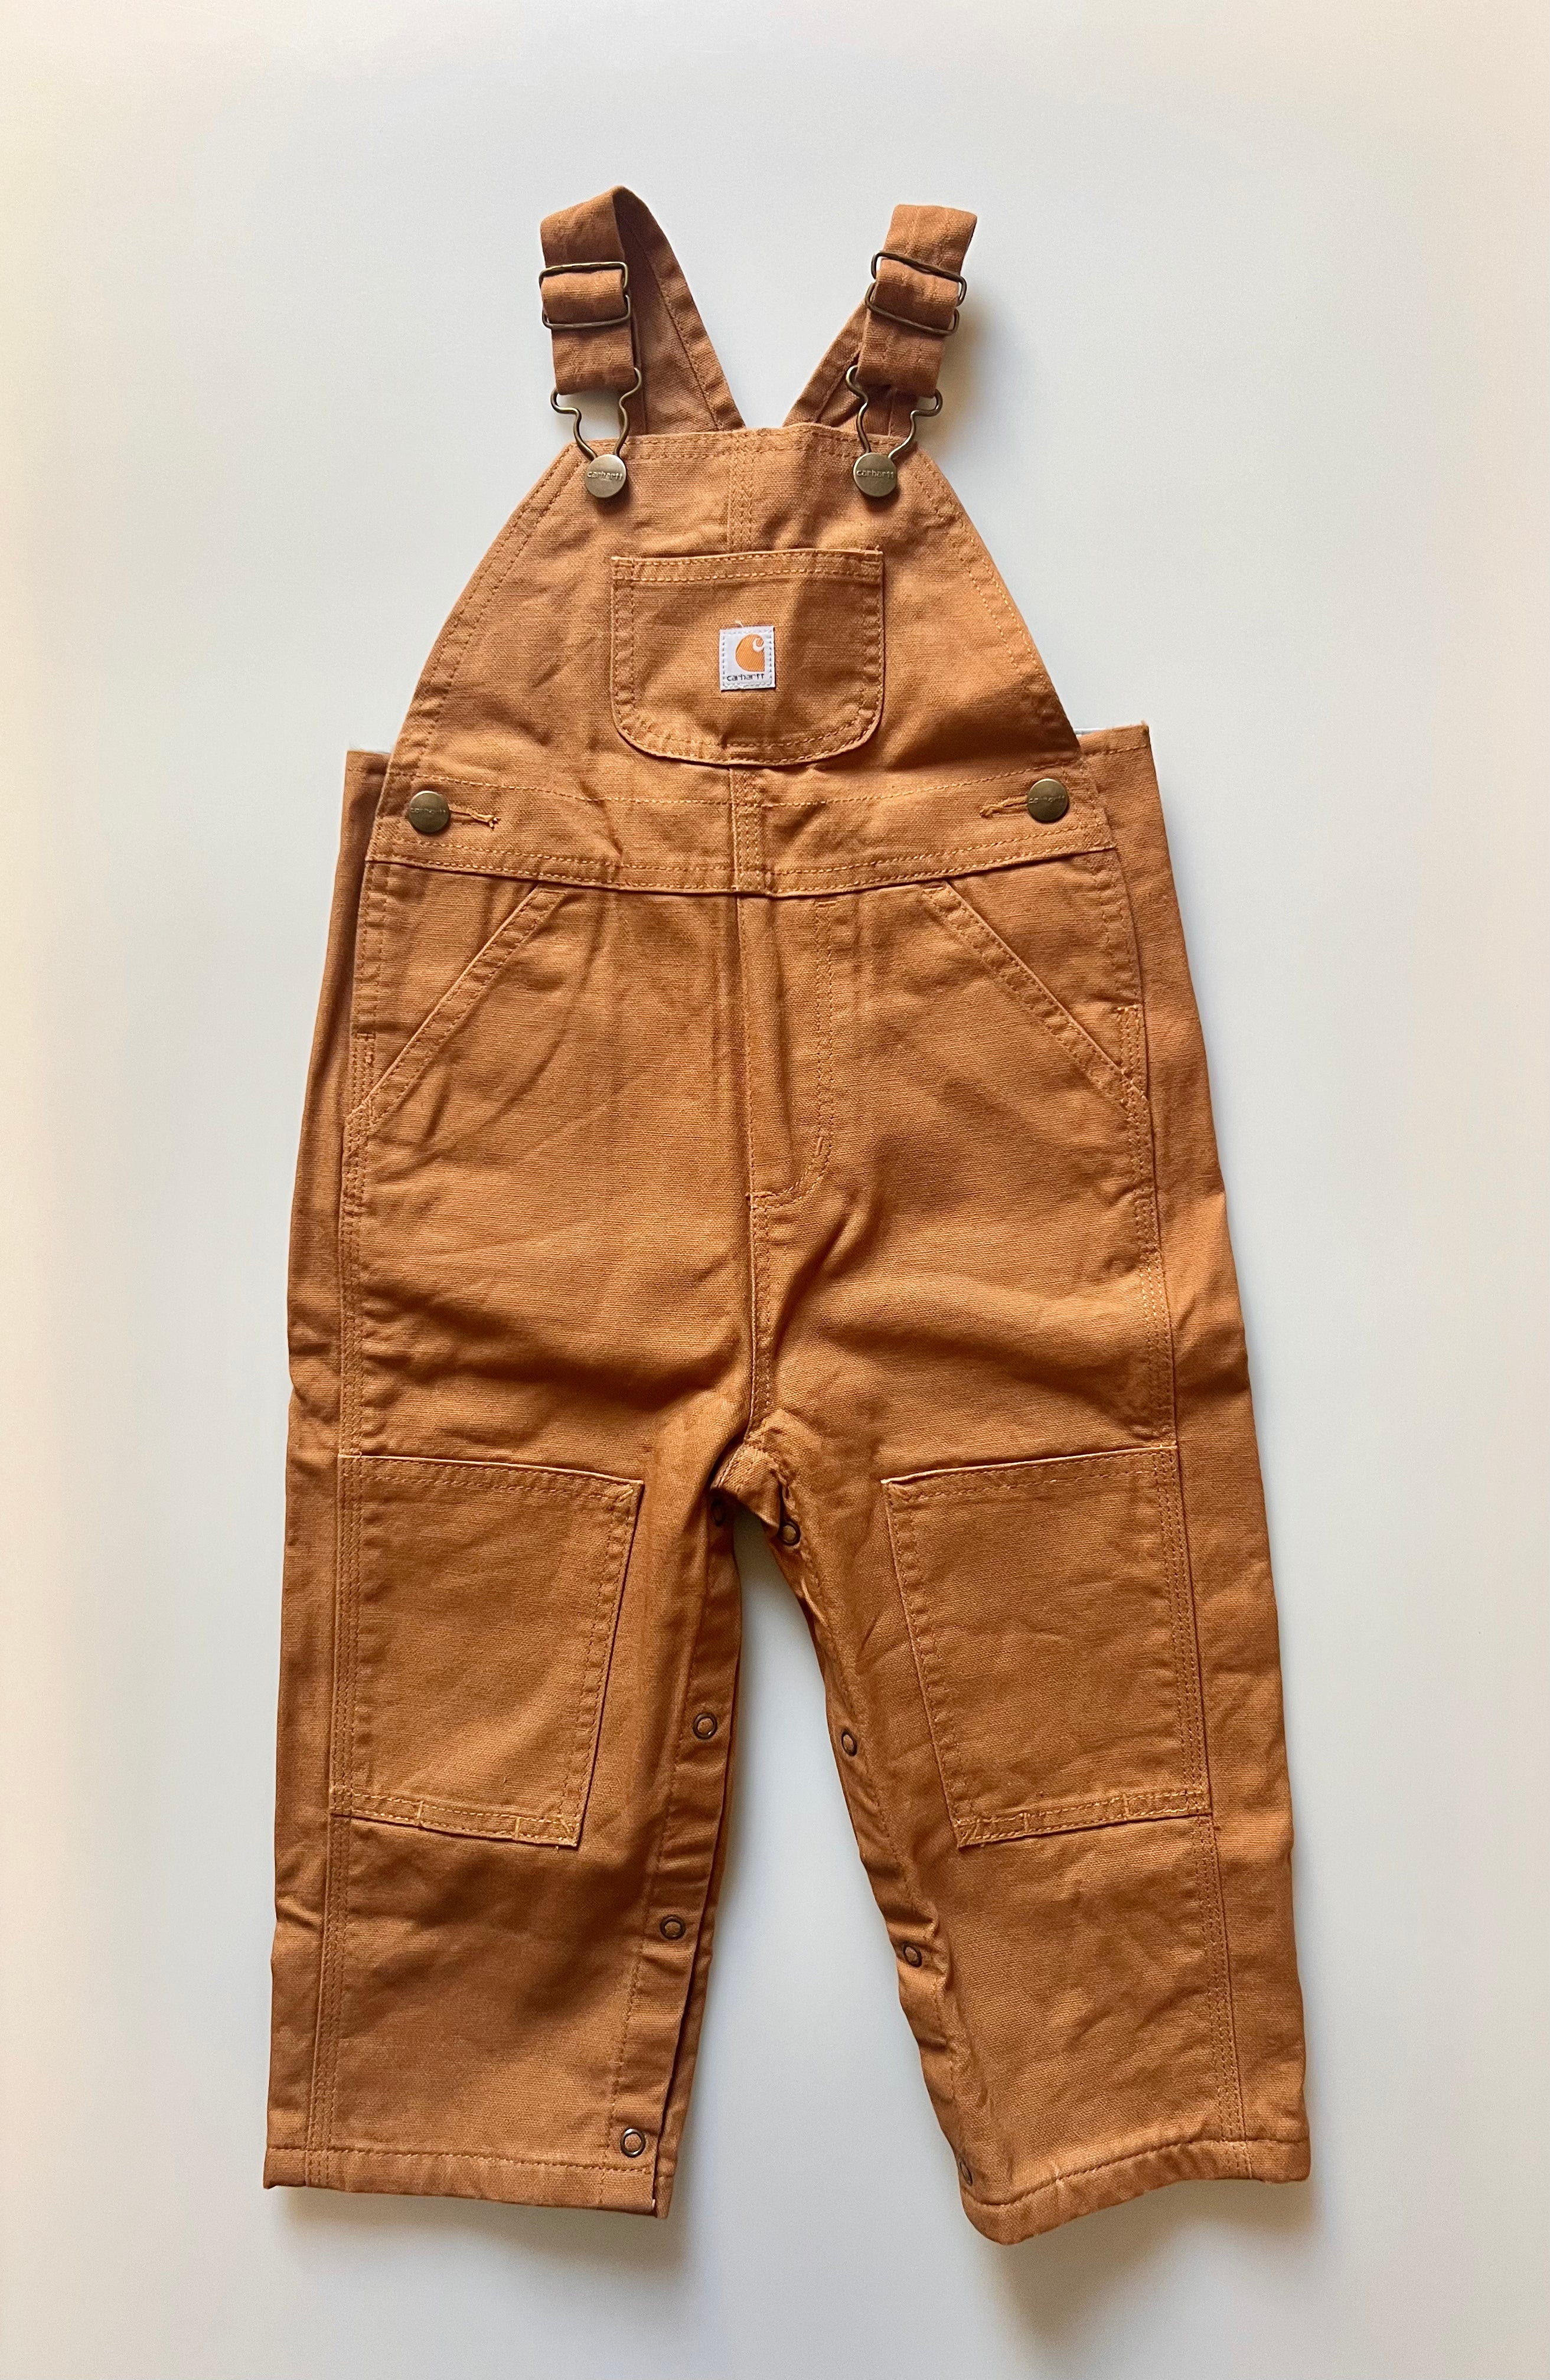 NEW Carhartt Canvas Fleece Lined Dungarees Age 2